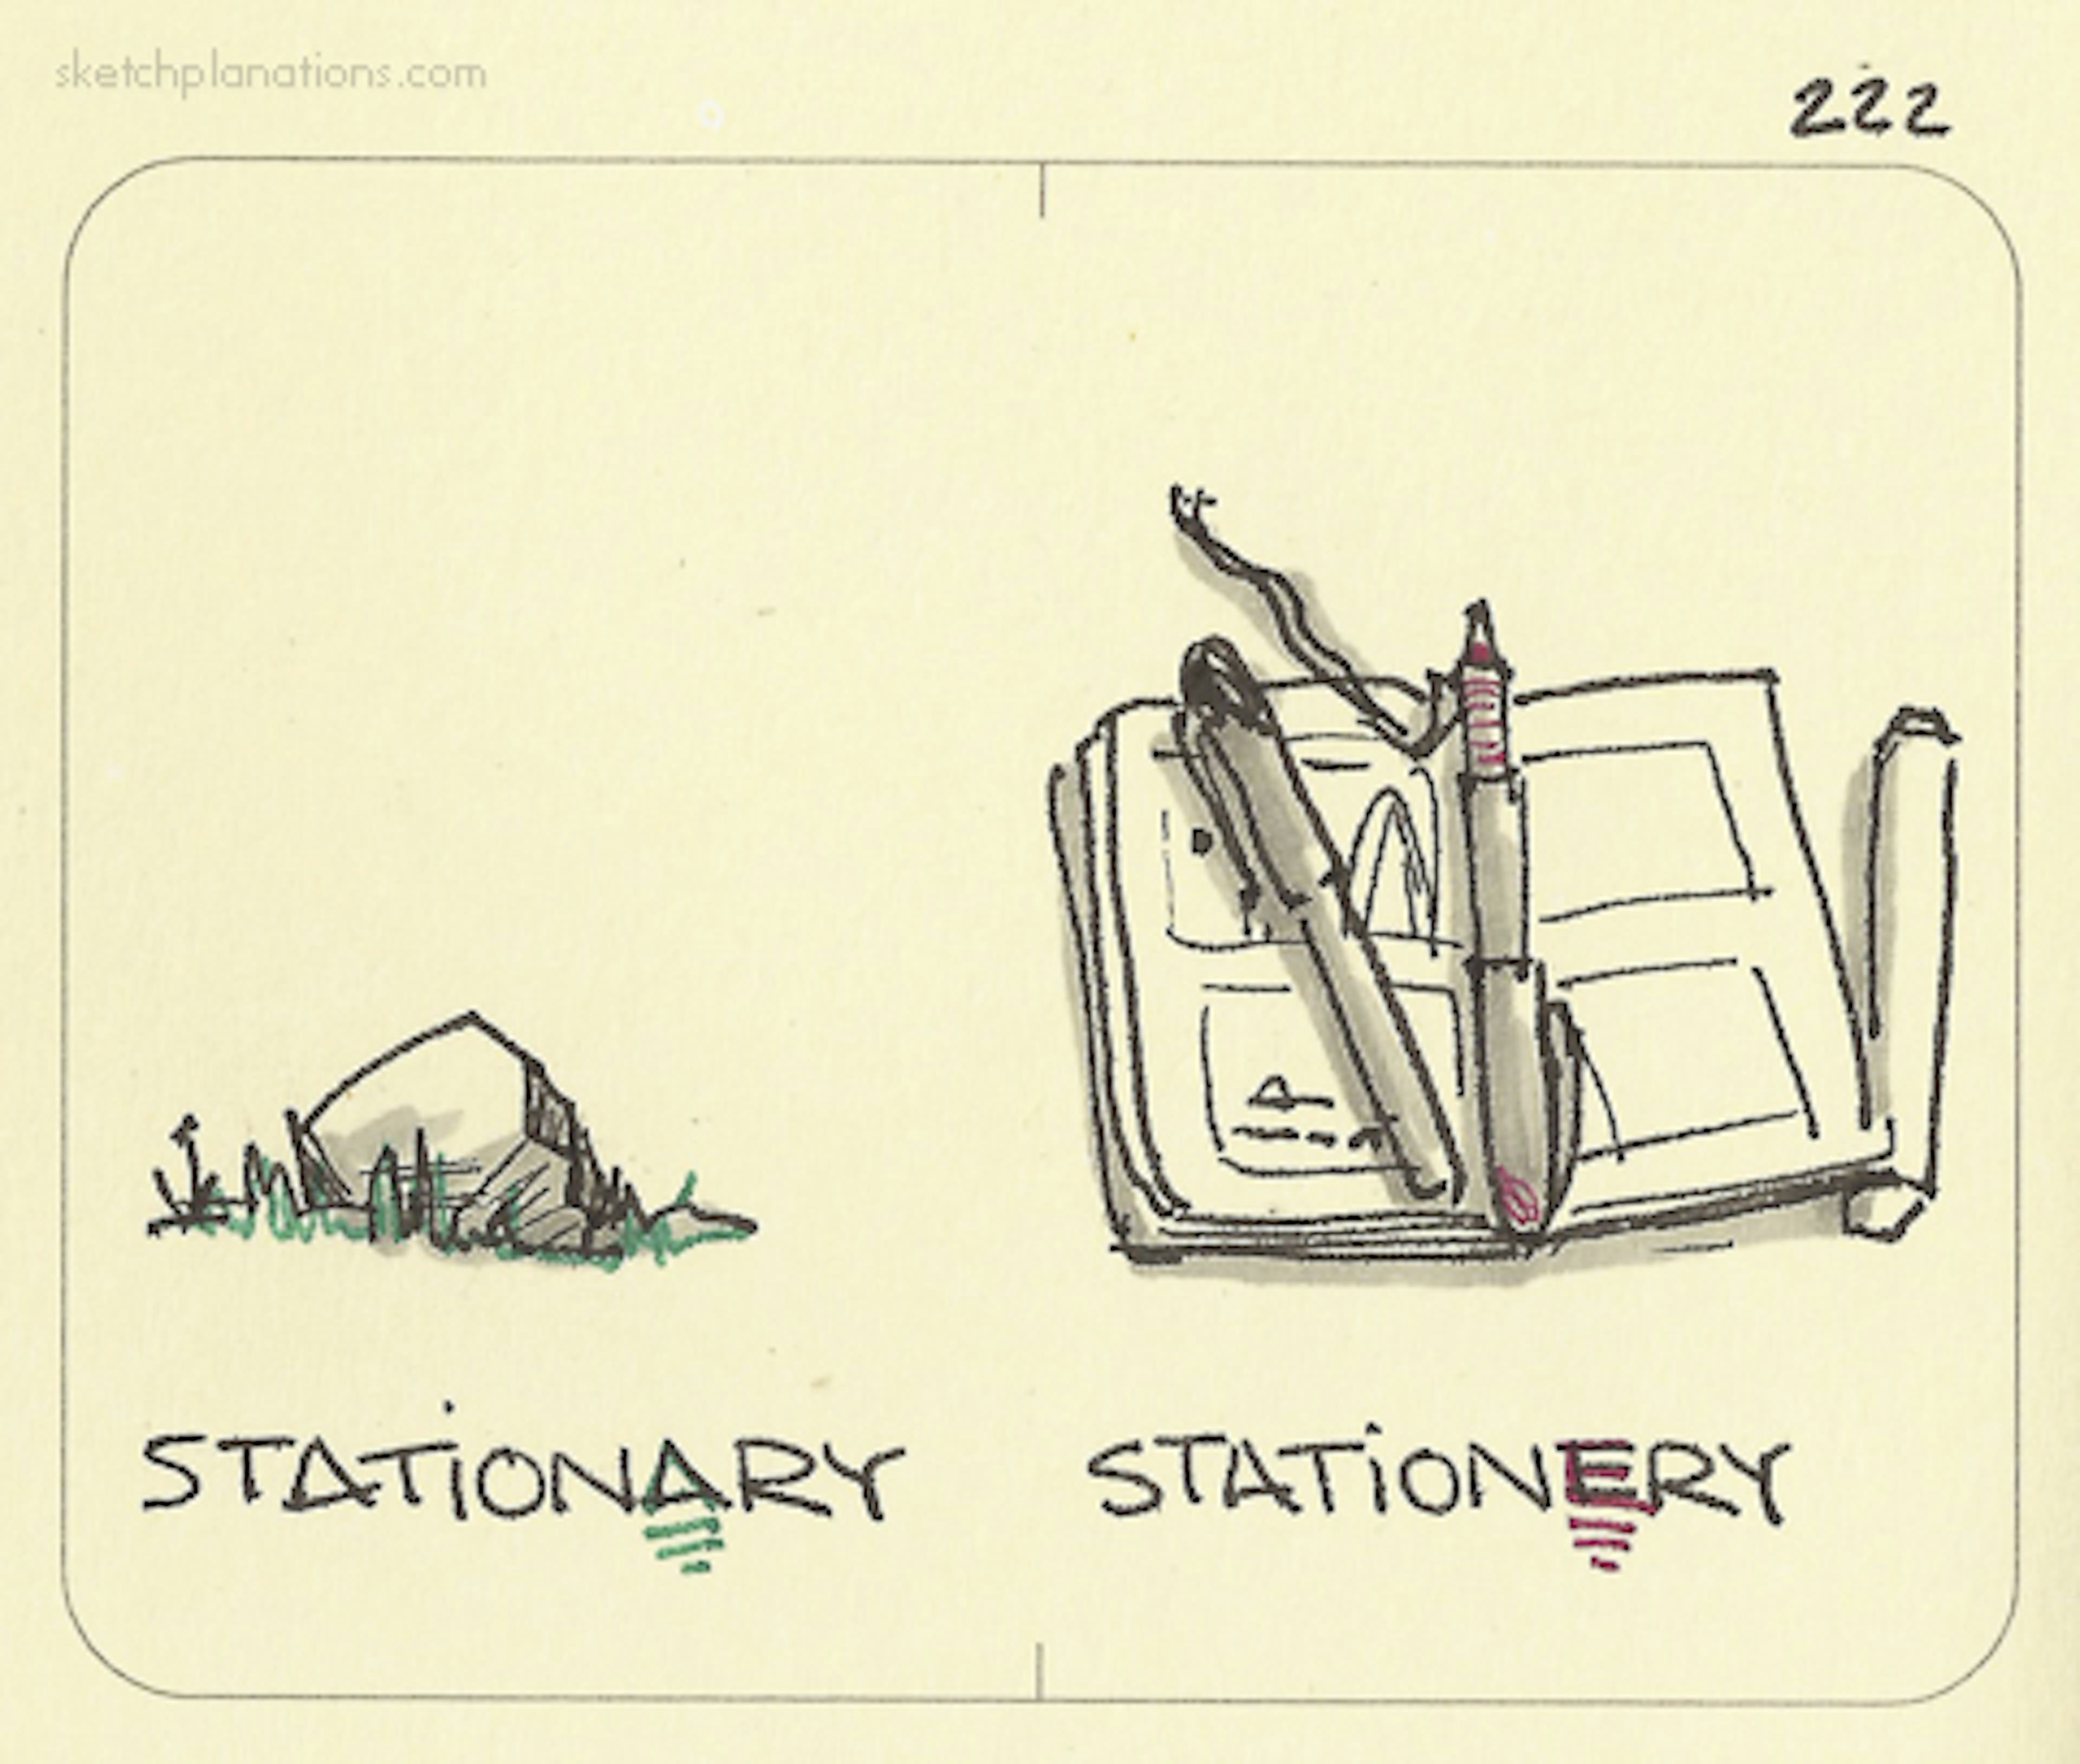 Stationary and Stationery - Sketchplanations